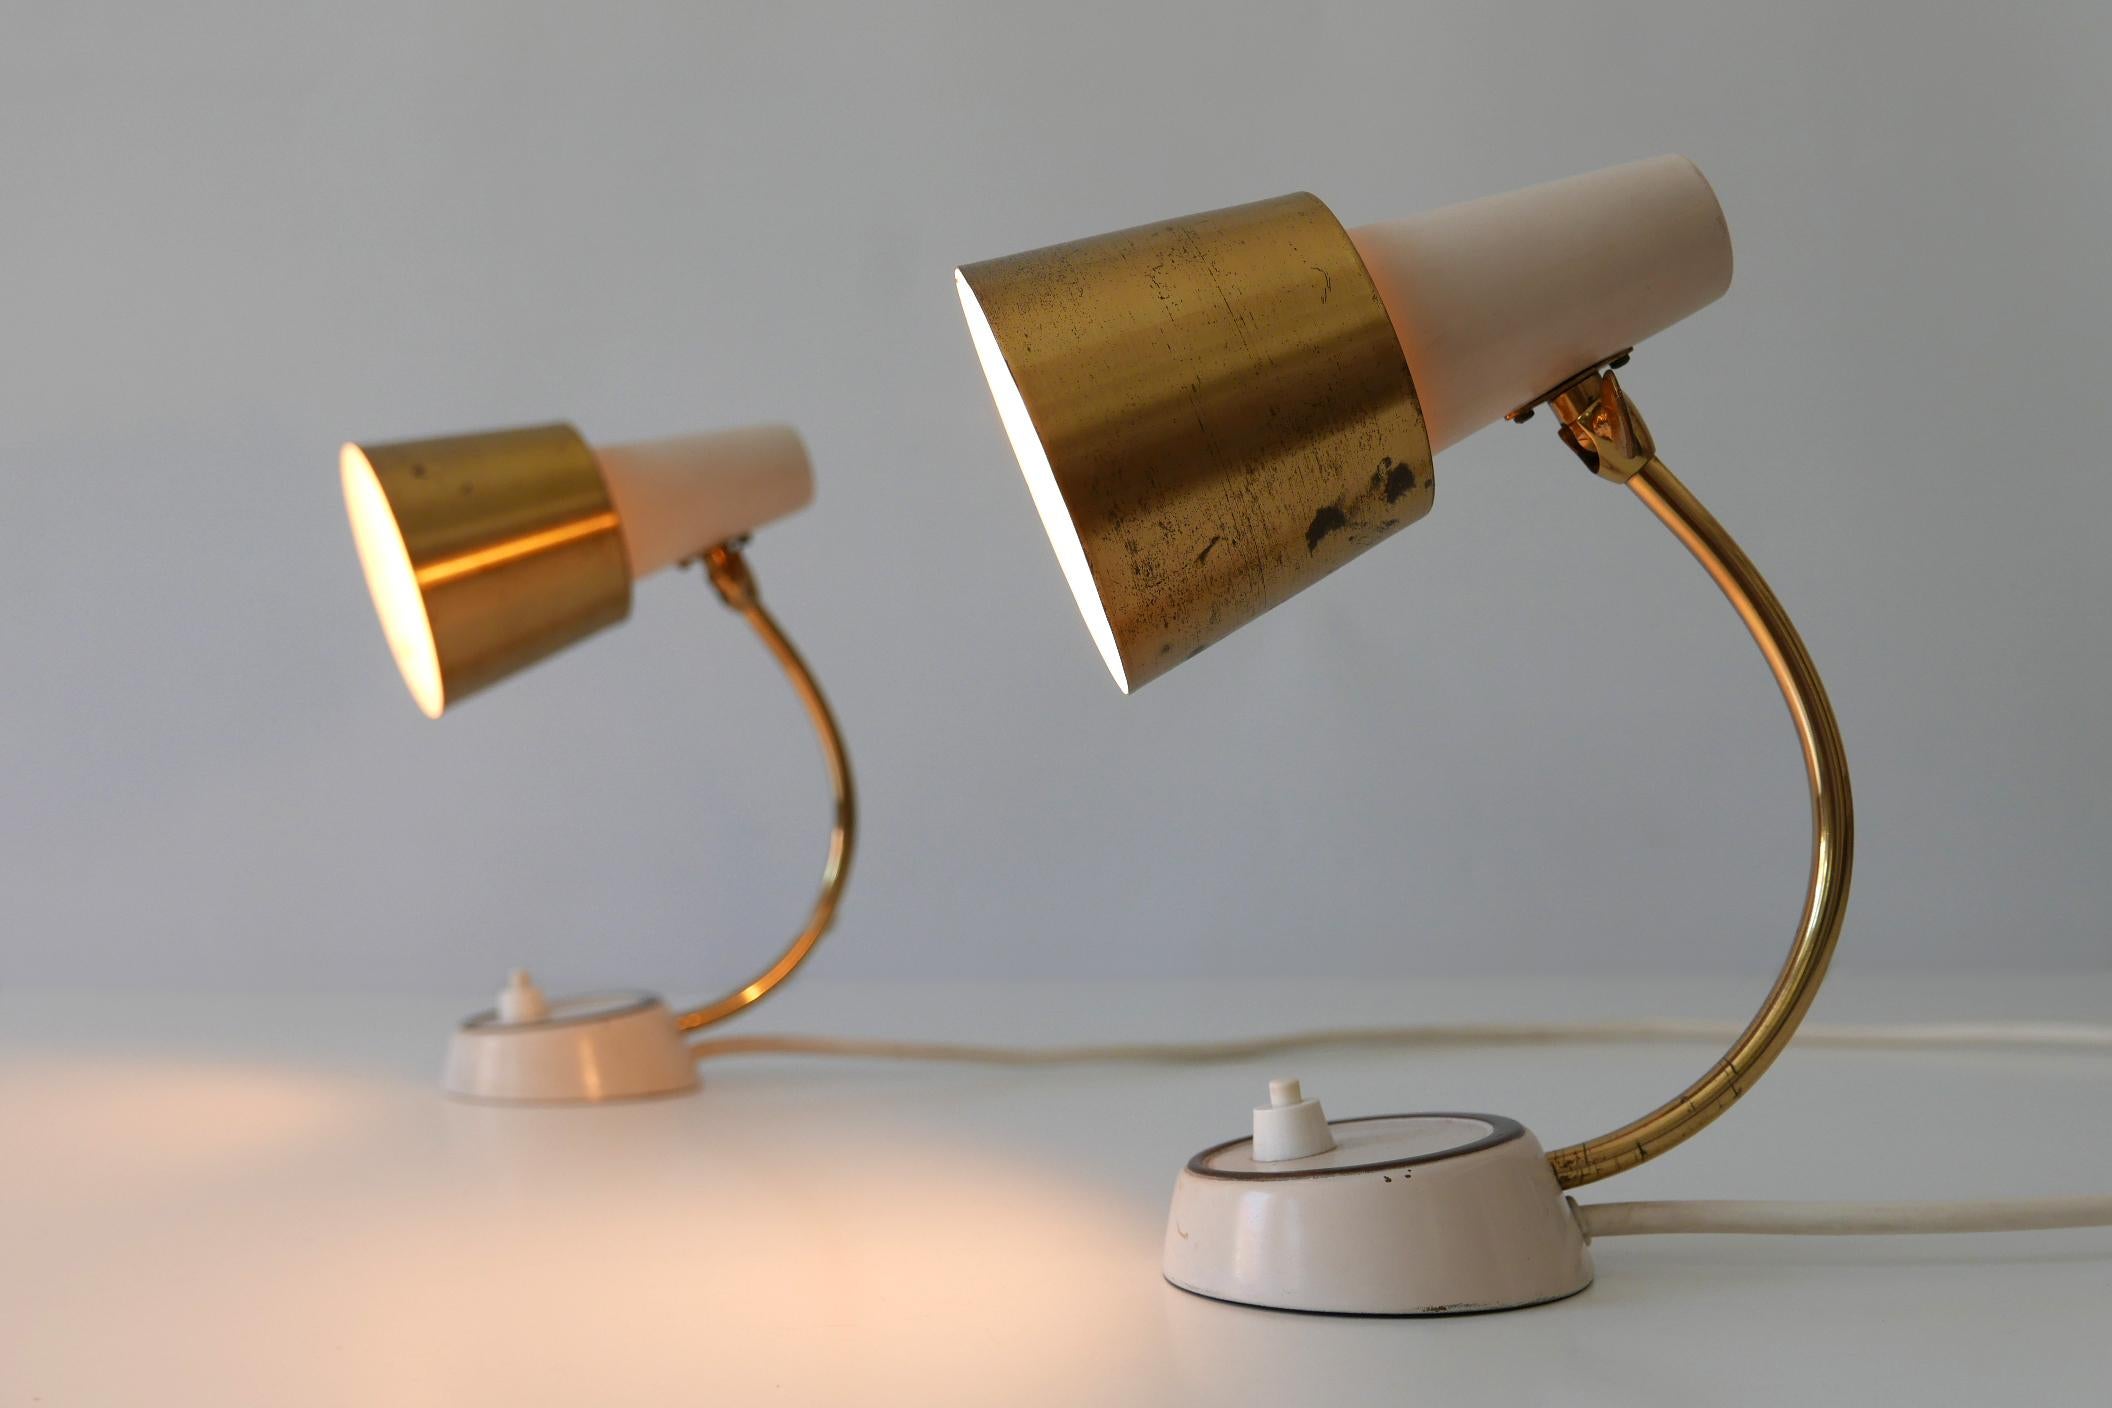 Brass Set of Two Mid-Century Modern Bedside Table Lamps or Wall Lights, 1950s, Germany For Sale